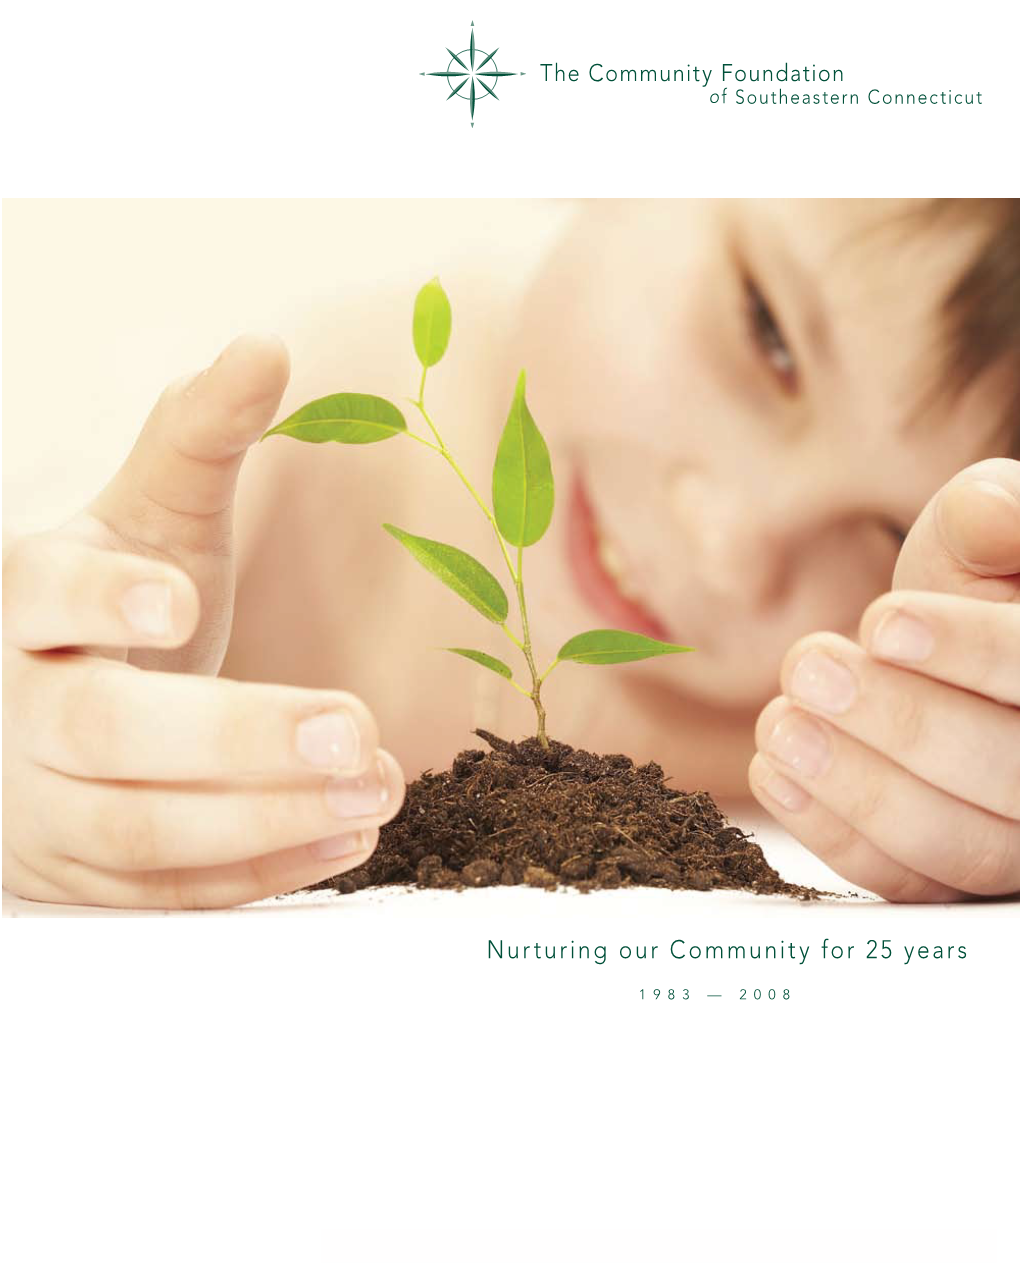 Nurturing Our Community for 25 Years